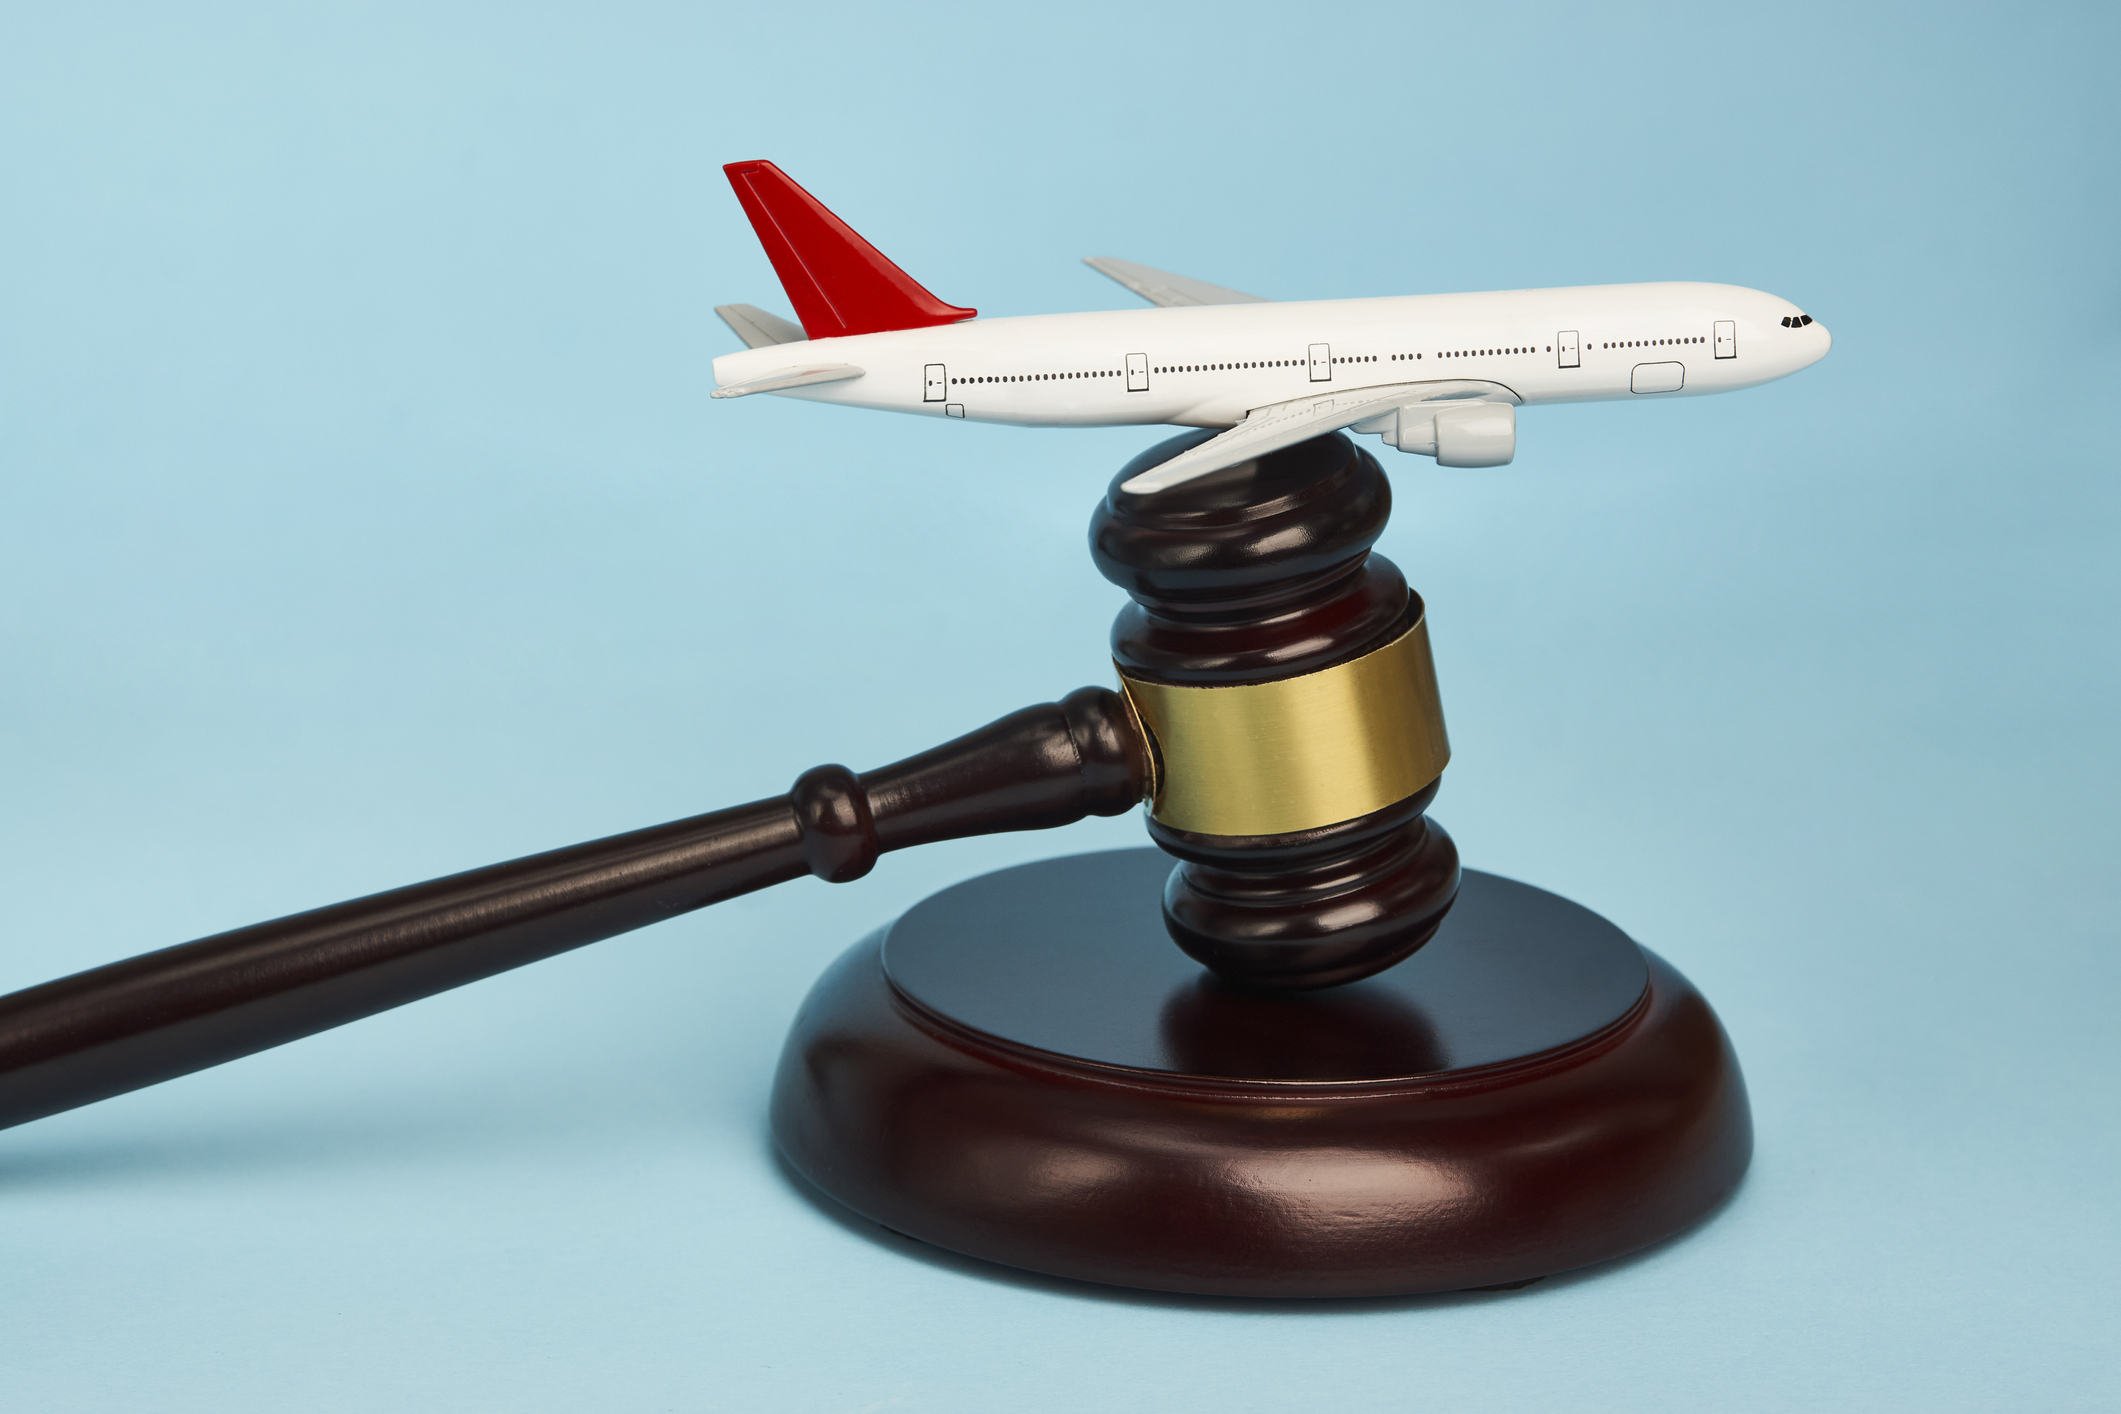 Congressional Action Needed to Strengthen Airline Consumer Protection  Regulations · Consumer Federation of America